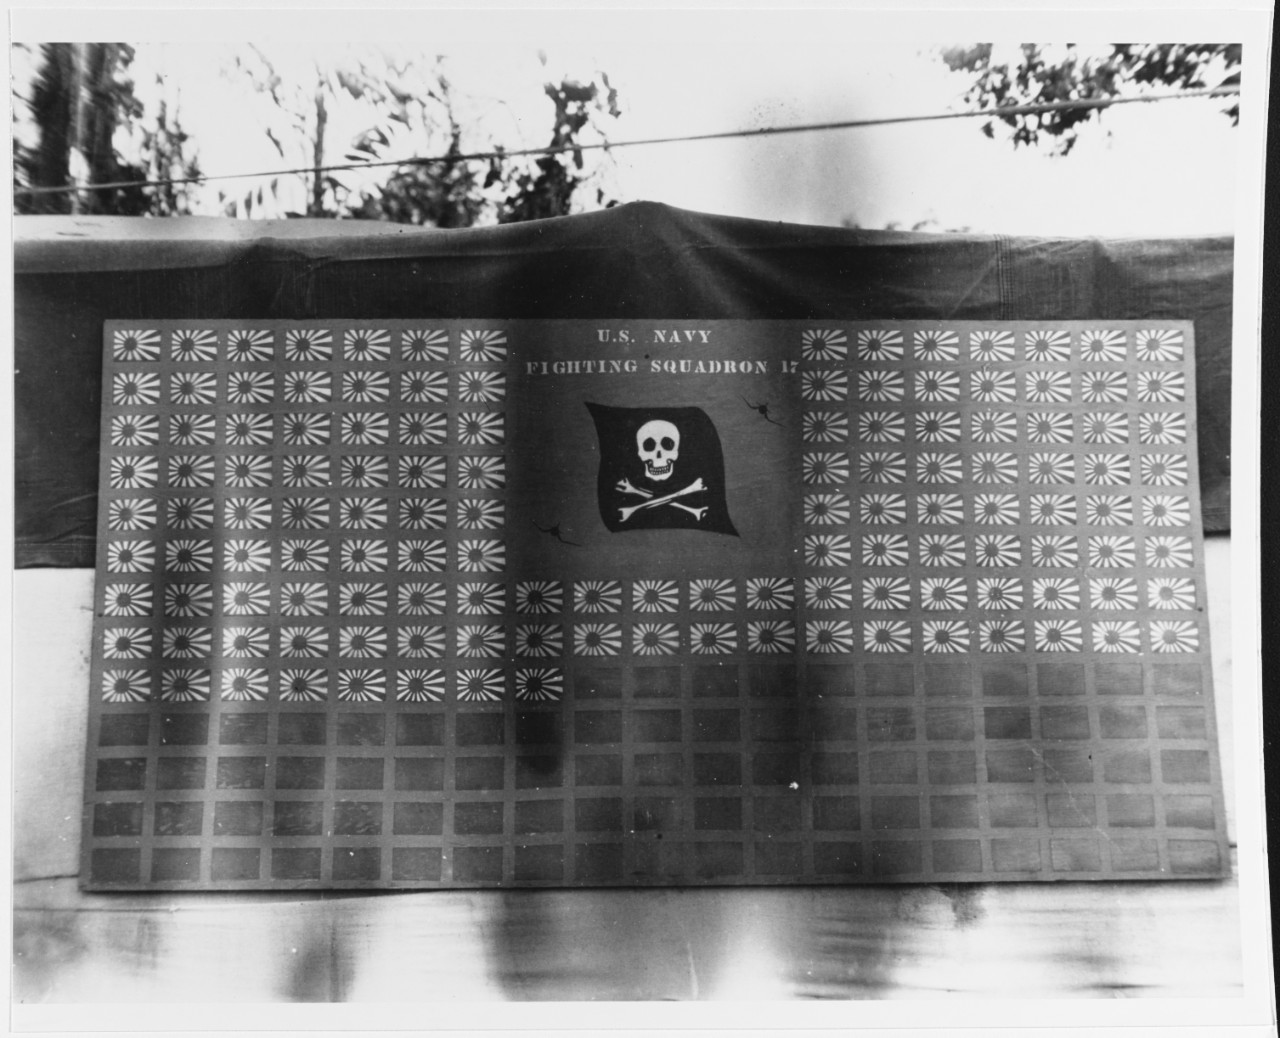 The men of VF-17 keep a scoreboard on Bougainville of their “kills,” which in this photo shows their claim of splashing 130 enemy planes, circa February 1944. The fighter pilots score all of these victories over the Solomon Islands, in November 1...